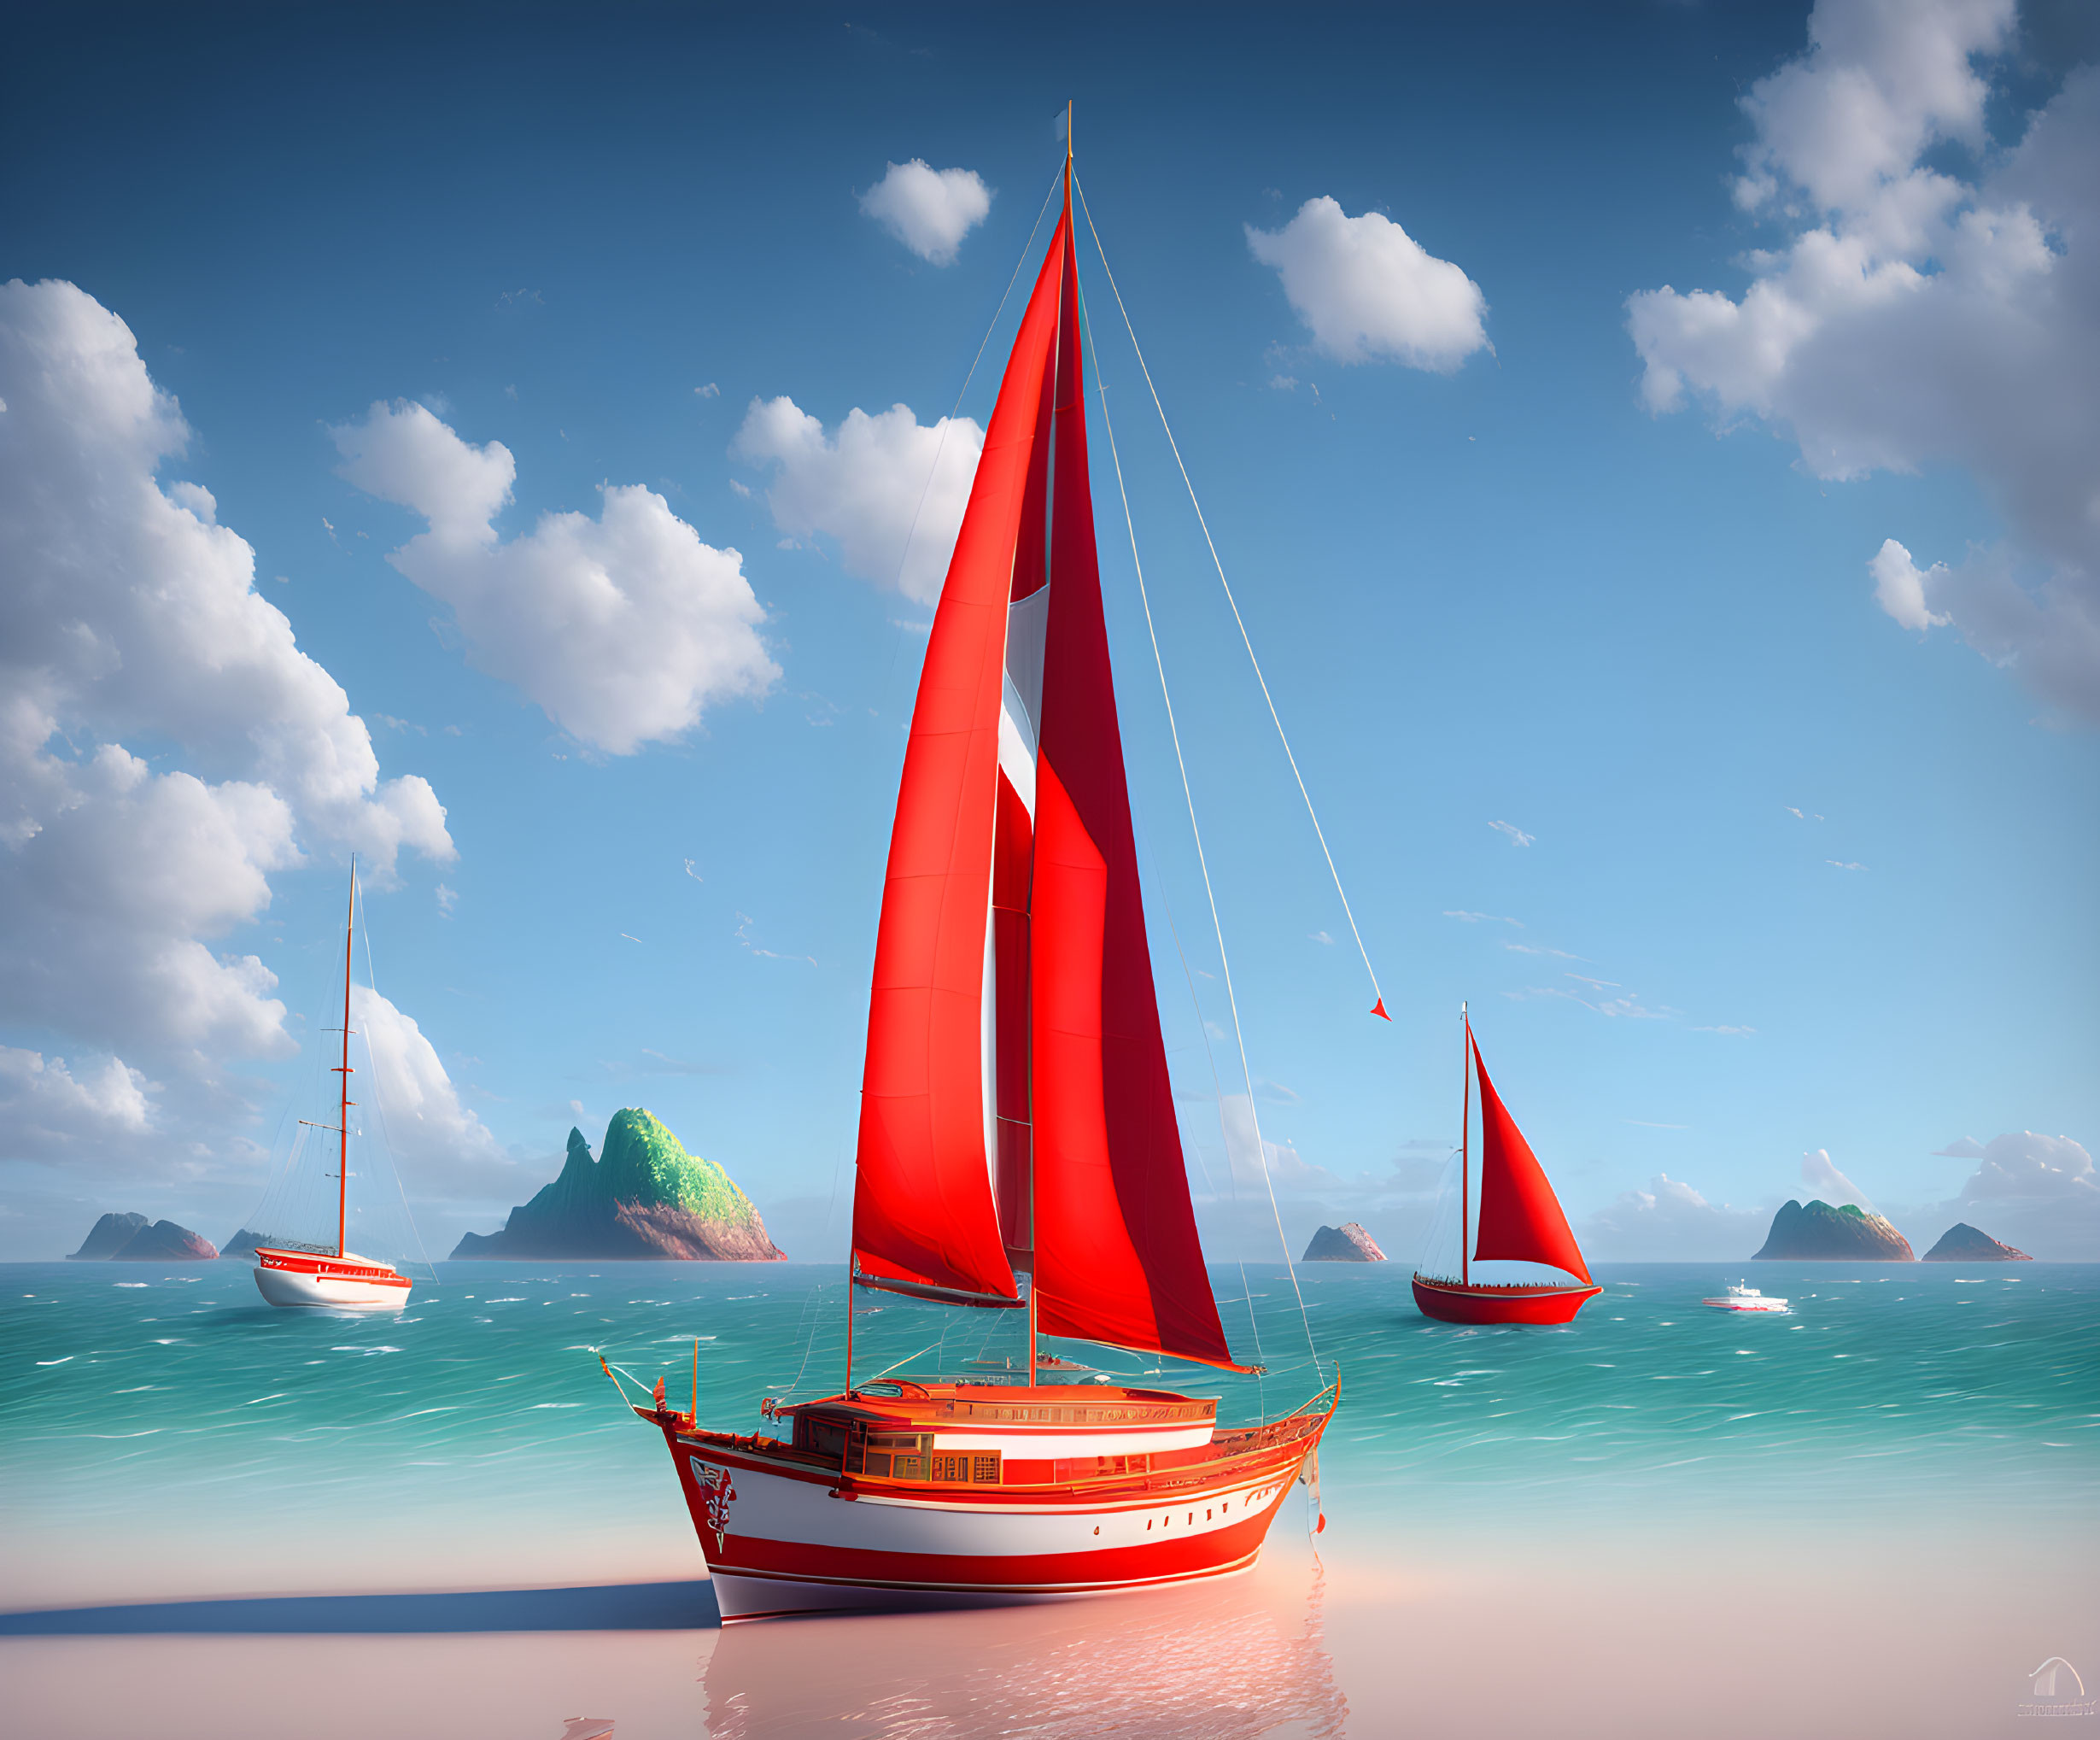 Red Sails on Calm Waters